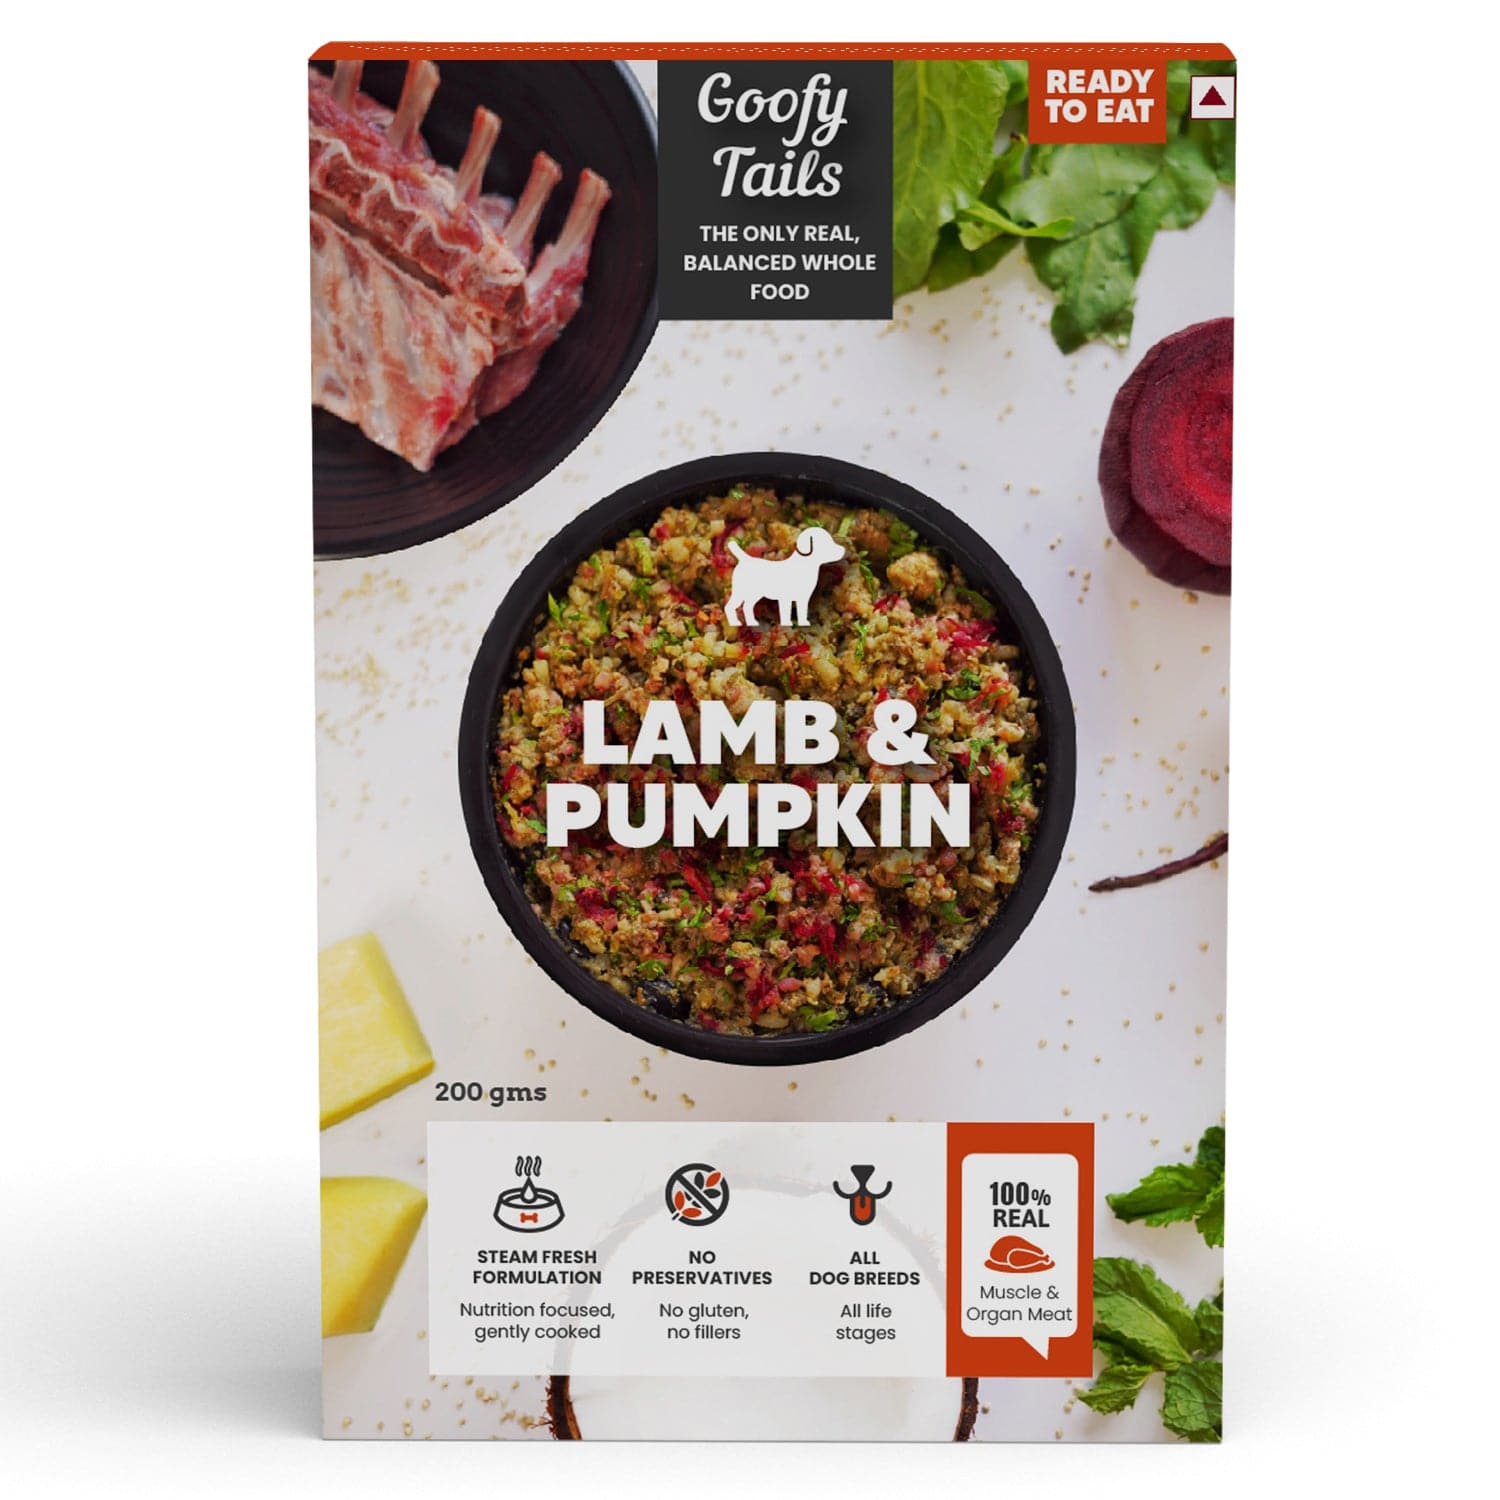 Goofy Fresh 4 Tester Pack of Ready-to- Eat Meal + Bone Broth (7331321774230)